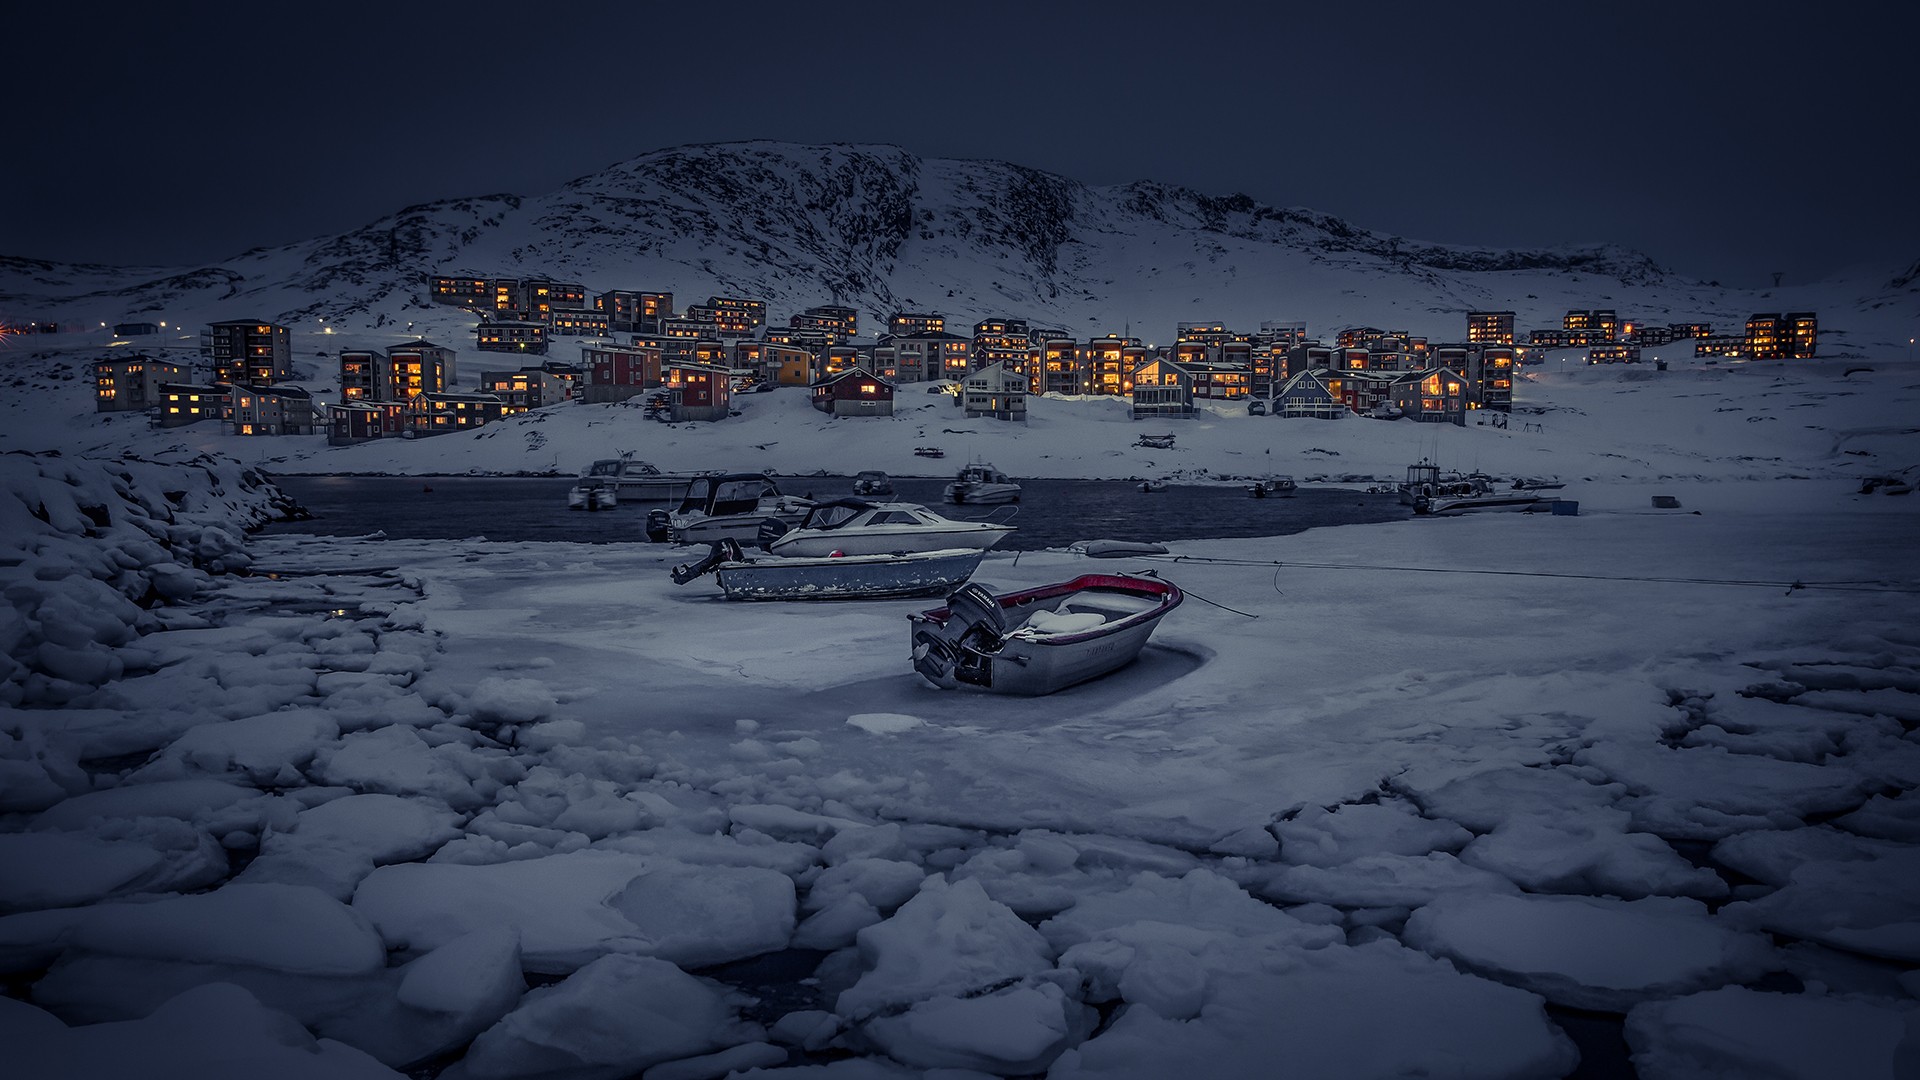 nature, Landscape, Winter, Snow, Ice, Mountains, Snowy peak, Greenland, Evening, Village, House, Boat, Lake, Building Wallpaper